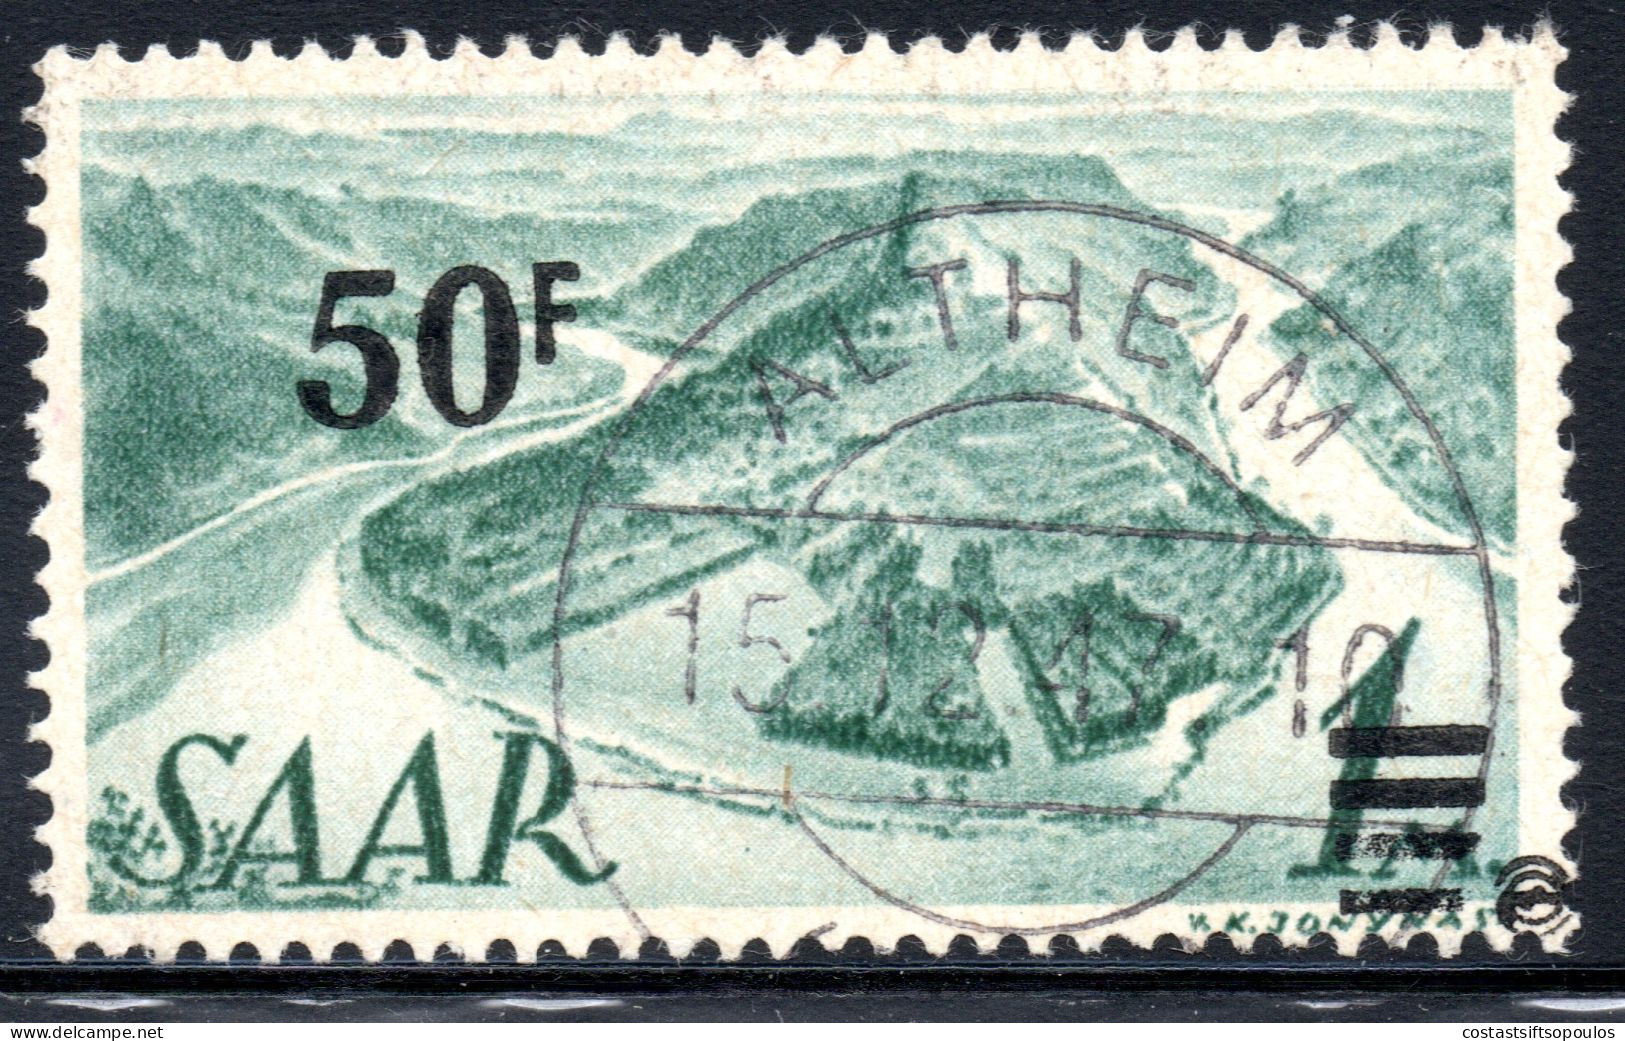 3053. SAAR 1947 50 F. / 1 M.. SIGNED ??? - Used Stamps